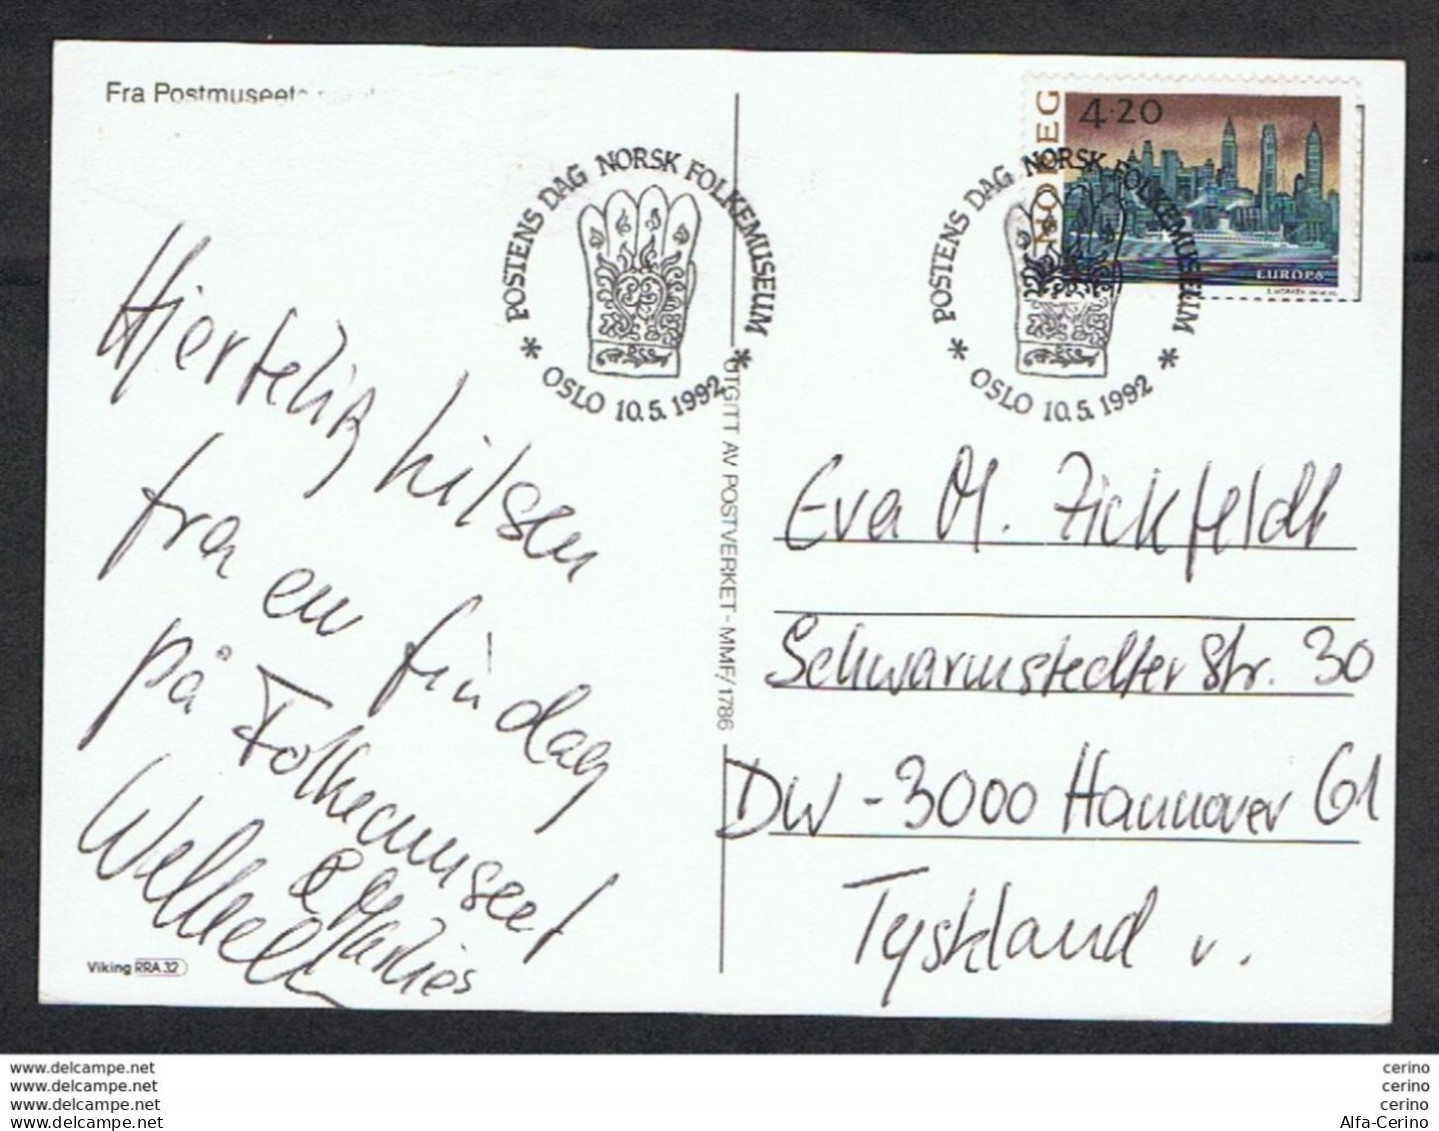 NORWAY: 1992  ILLUSTRATED  POSTCARD WITH 4k. 20 EUROPA CEPT (1054) - TO GERMANY - Covers & Documents